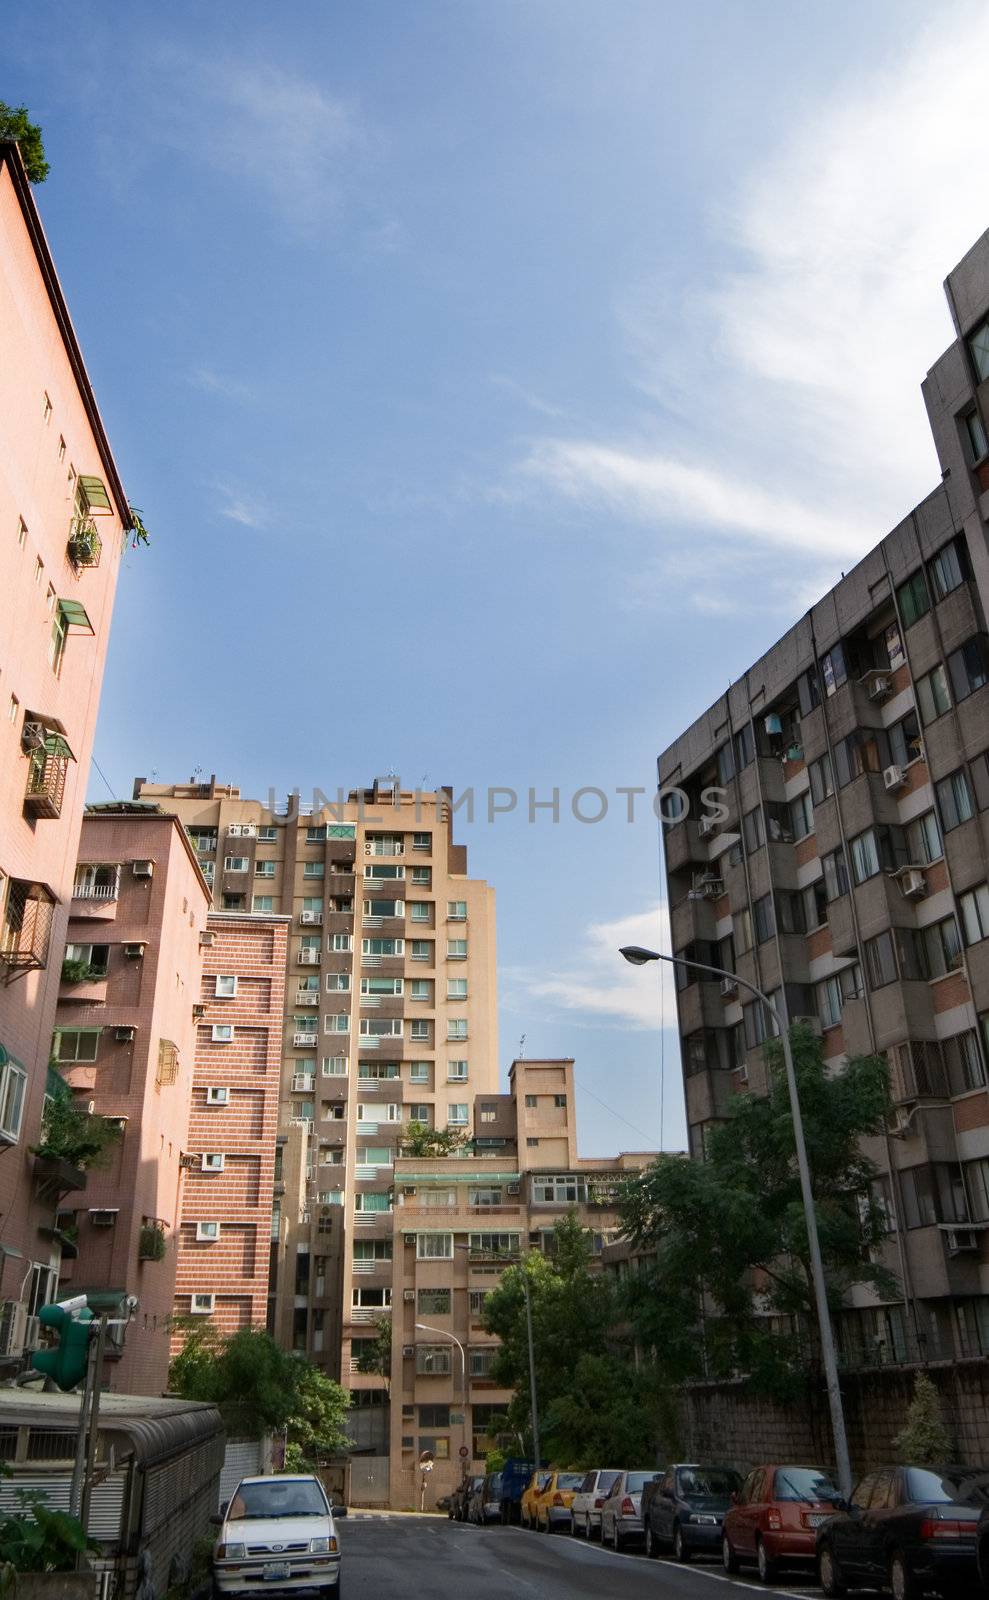 It is the cityscape of street and apartment.